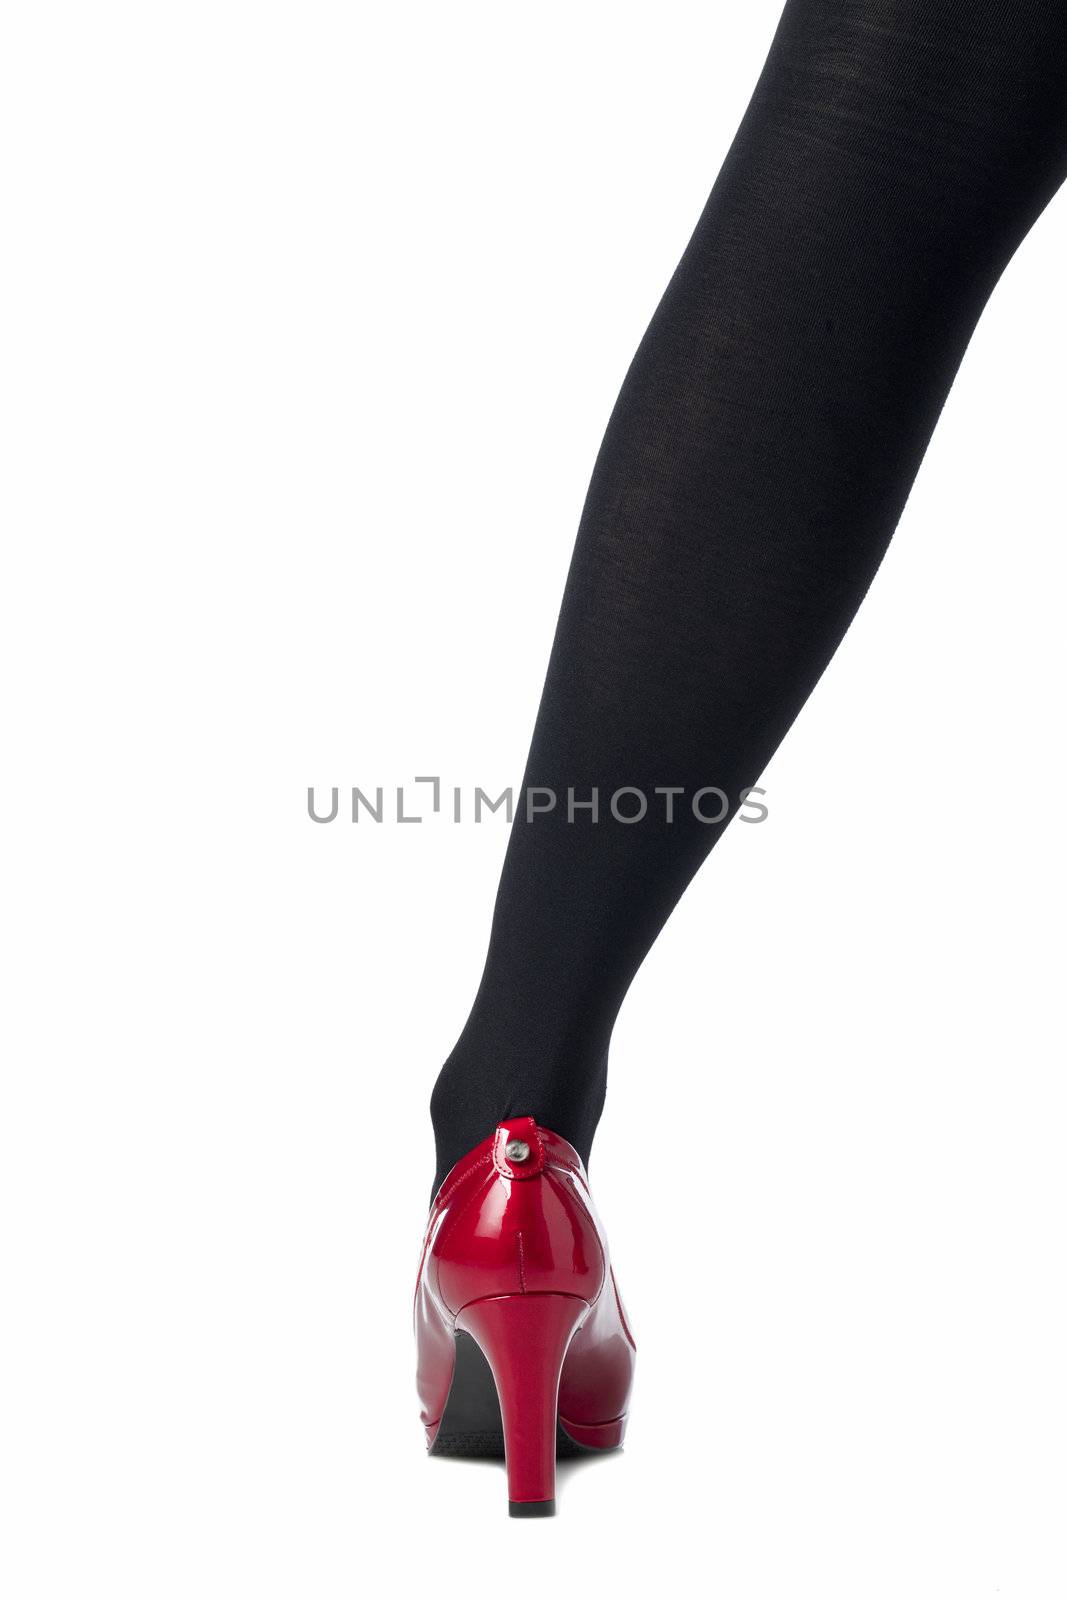 Close up image of female leg with black stocking and red shoes against white background